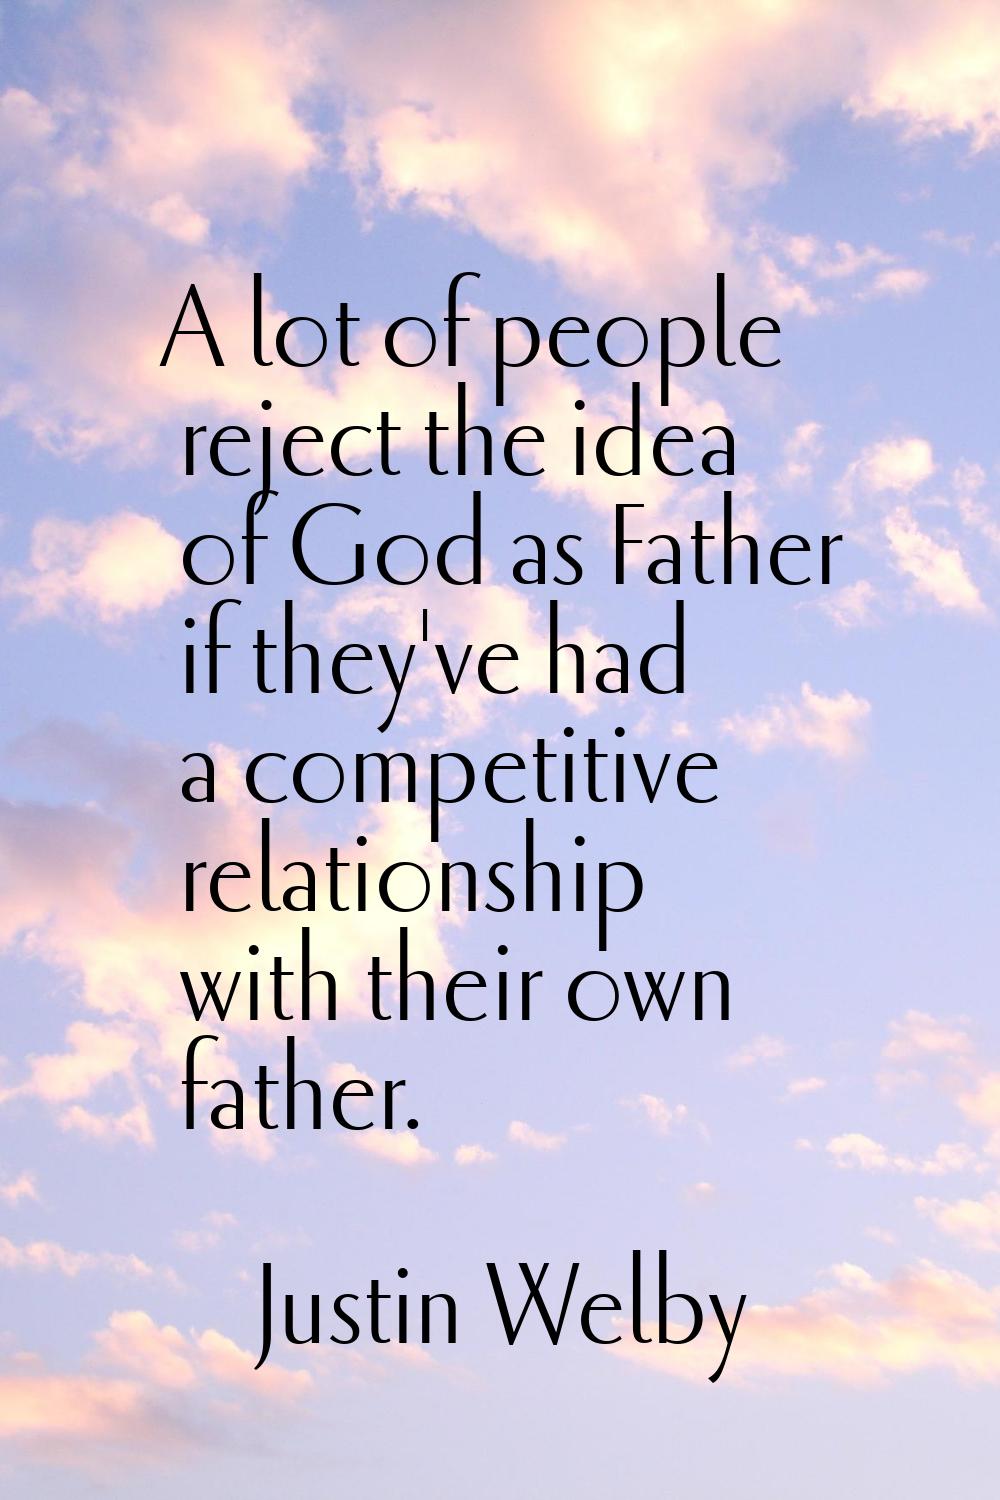 A lot of people reject the idea of God as Father if they've had a competitive relationship with the